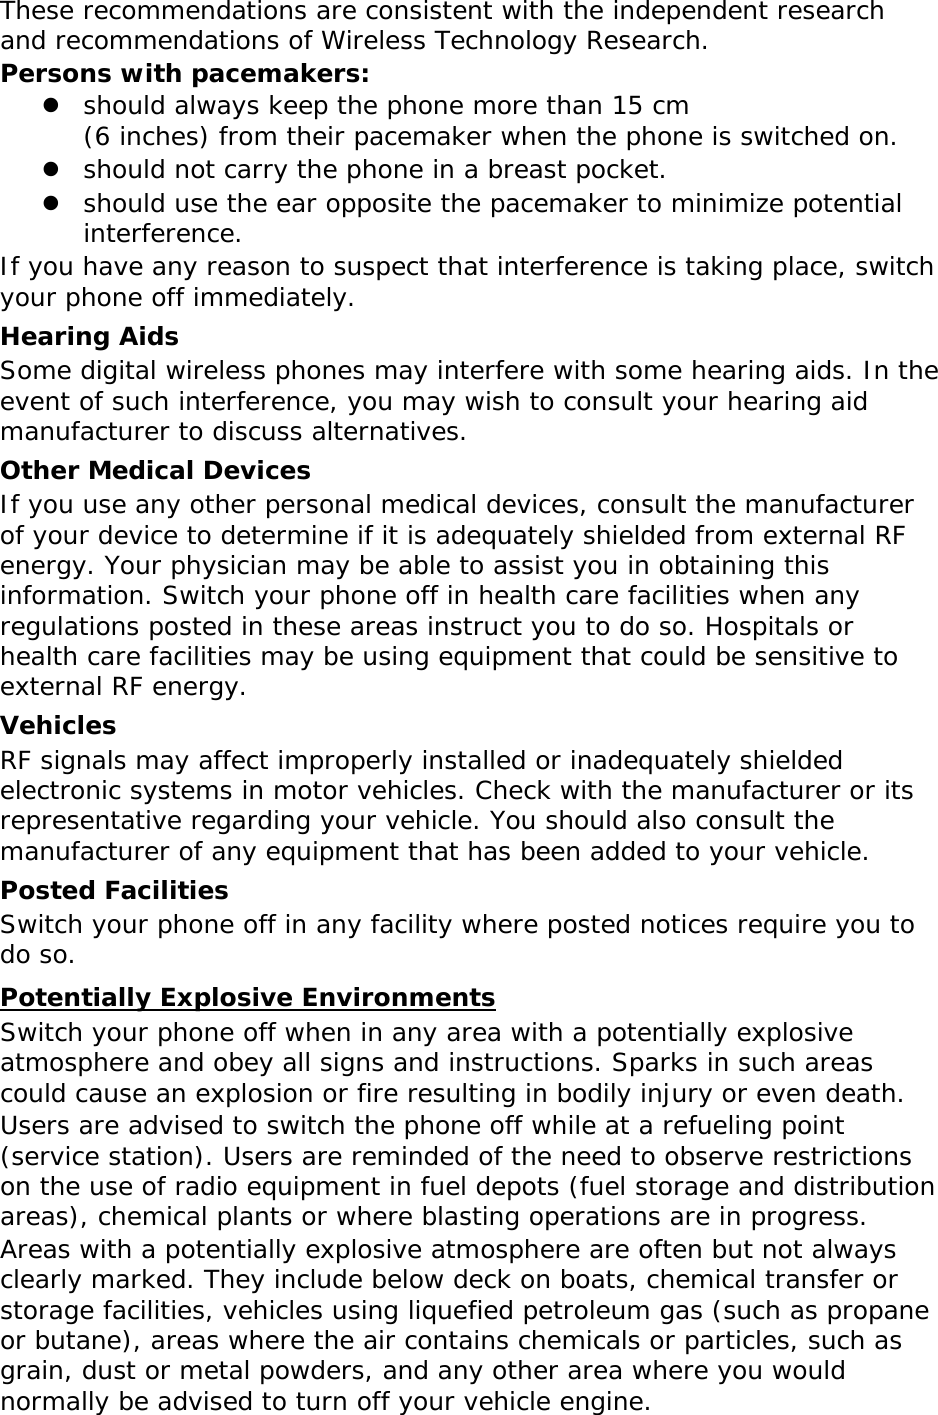 These recommendations are consistent with the independent research and recommendations of Wireless Technology Research. Persons with pacemakers: z should always keep the phone more than 15 cm  (6 inches) from their pacemaker when the phone is switched on. z should not carry the phone in a breast pocket. z should use the ear opposite the pacemaker to minimize potential interference. If you have any reason to suspect that interference is taking place, switch your phone off immediately. Hearing Aids Some digital wireless phones may interfere with some hearing aids. In the event of such interference, you may wish to consult your hearing aid manufacturer to discuss alternatives. Other Medical Devices If you use any other personal medical devices, consult the manufacturer of your device to determine if it is adequately shielded from external RF energy. Your physician may be able to assist you in obtaining this information. Switch your phone off in health care facilities when any regulations posted in these areas instruct you to do so. Hospitals or health care facilities may be using equipment that could be sensitive to external RF energy. Vehicles RF signals may affect improperly installed or inadequately shielded electronic systems in motor vehicles. Check with the manufacturer or its representative regarding your vehicle. You should also consult the manufacturer of any equipment that has been added to your vehicle. Posted Facilities Switch your phone off in any facility where posted notices require you to do so. Potentially Explosive Environments Switch your phone off when in any area with a potentially explosive atmosphere and obey all signs and instructions. Sparks in such areas could cause an explosion or fire resulting in bodily injury or even death. Users are advised to switch the phone off while at a refueling point (service station). Users are reminded of the need to observe restrictions on the use of radio equipment in fuel depots (fuel storage and distribution areas), chemical plants or where blasting operations are in progress. Areas with a potentially explosive atmosphere are often but not always clearly marked. They include below deck on boats, chemical transfer or storage facilities, vehicles using liquefied petroleum gas (such as propane or butane), areas where the air contains chemicals or particles, such as grain, dust or metal powders, and any other area where you would normally be advised to turn off your vehicle engine. 